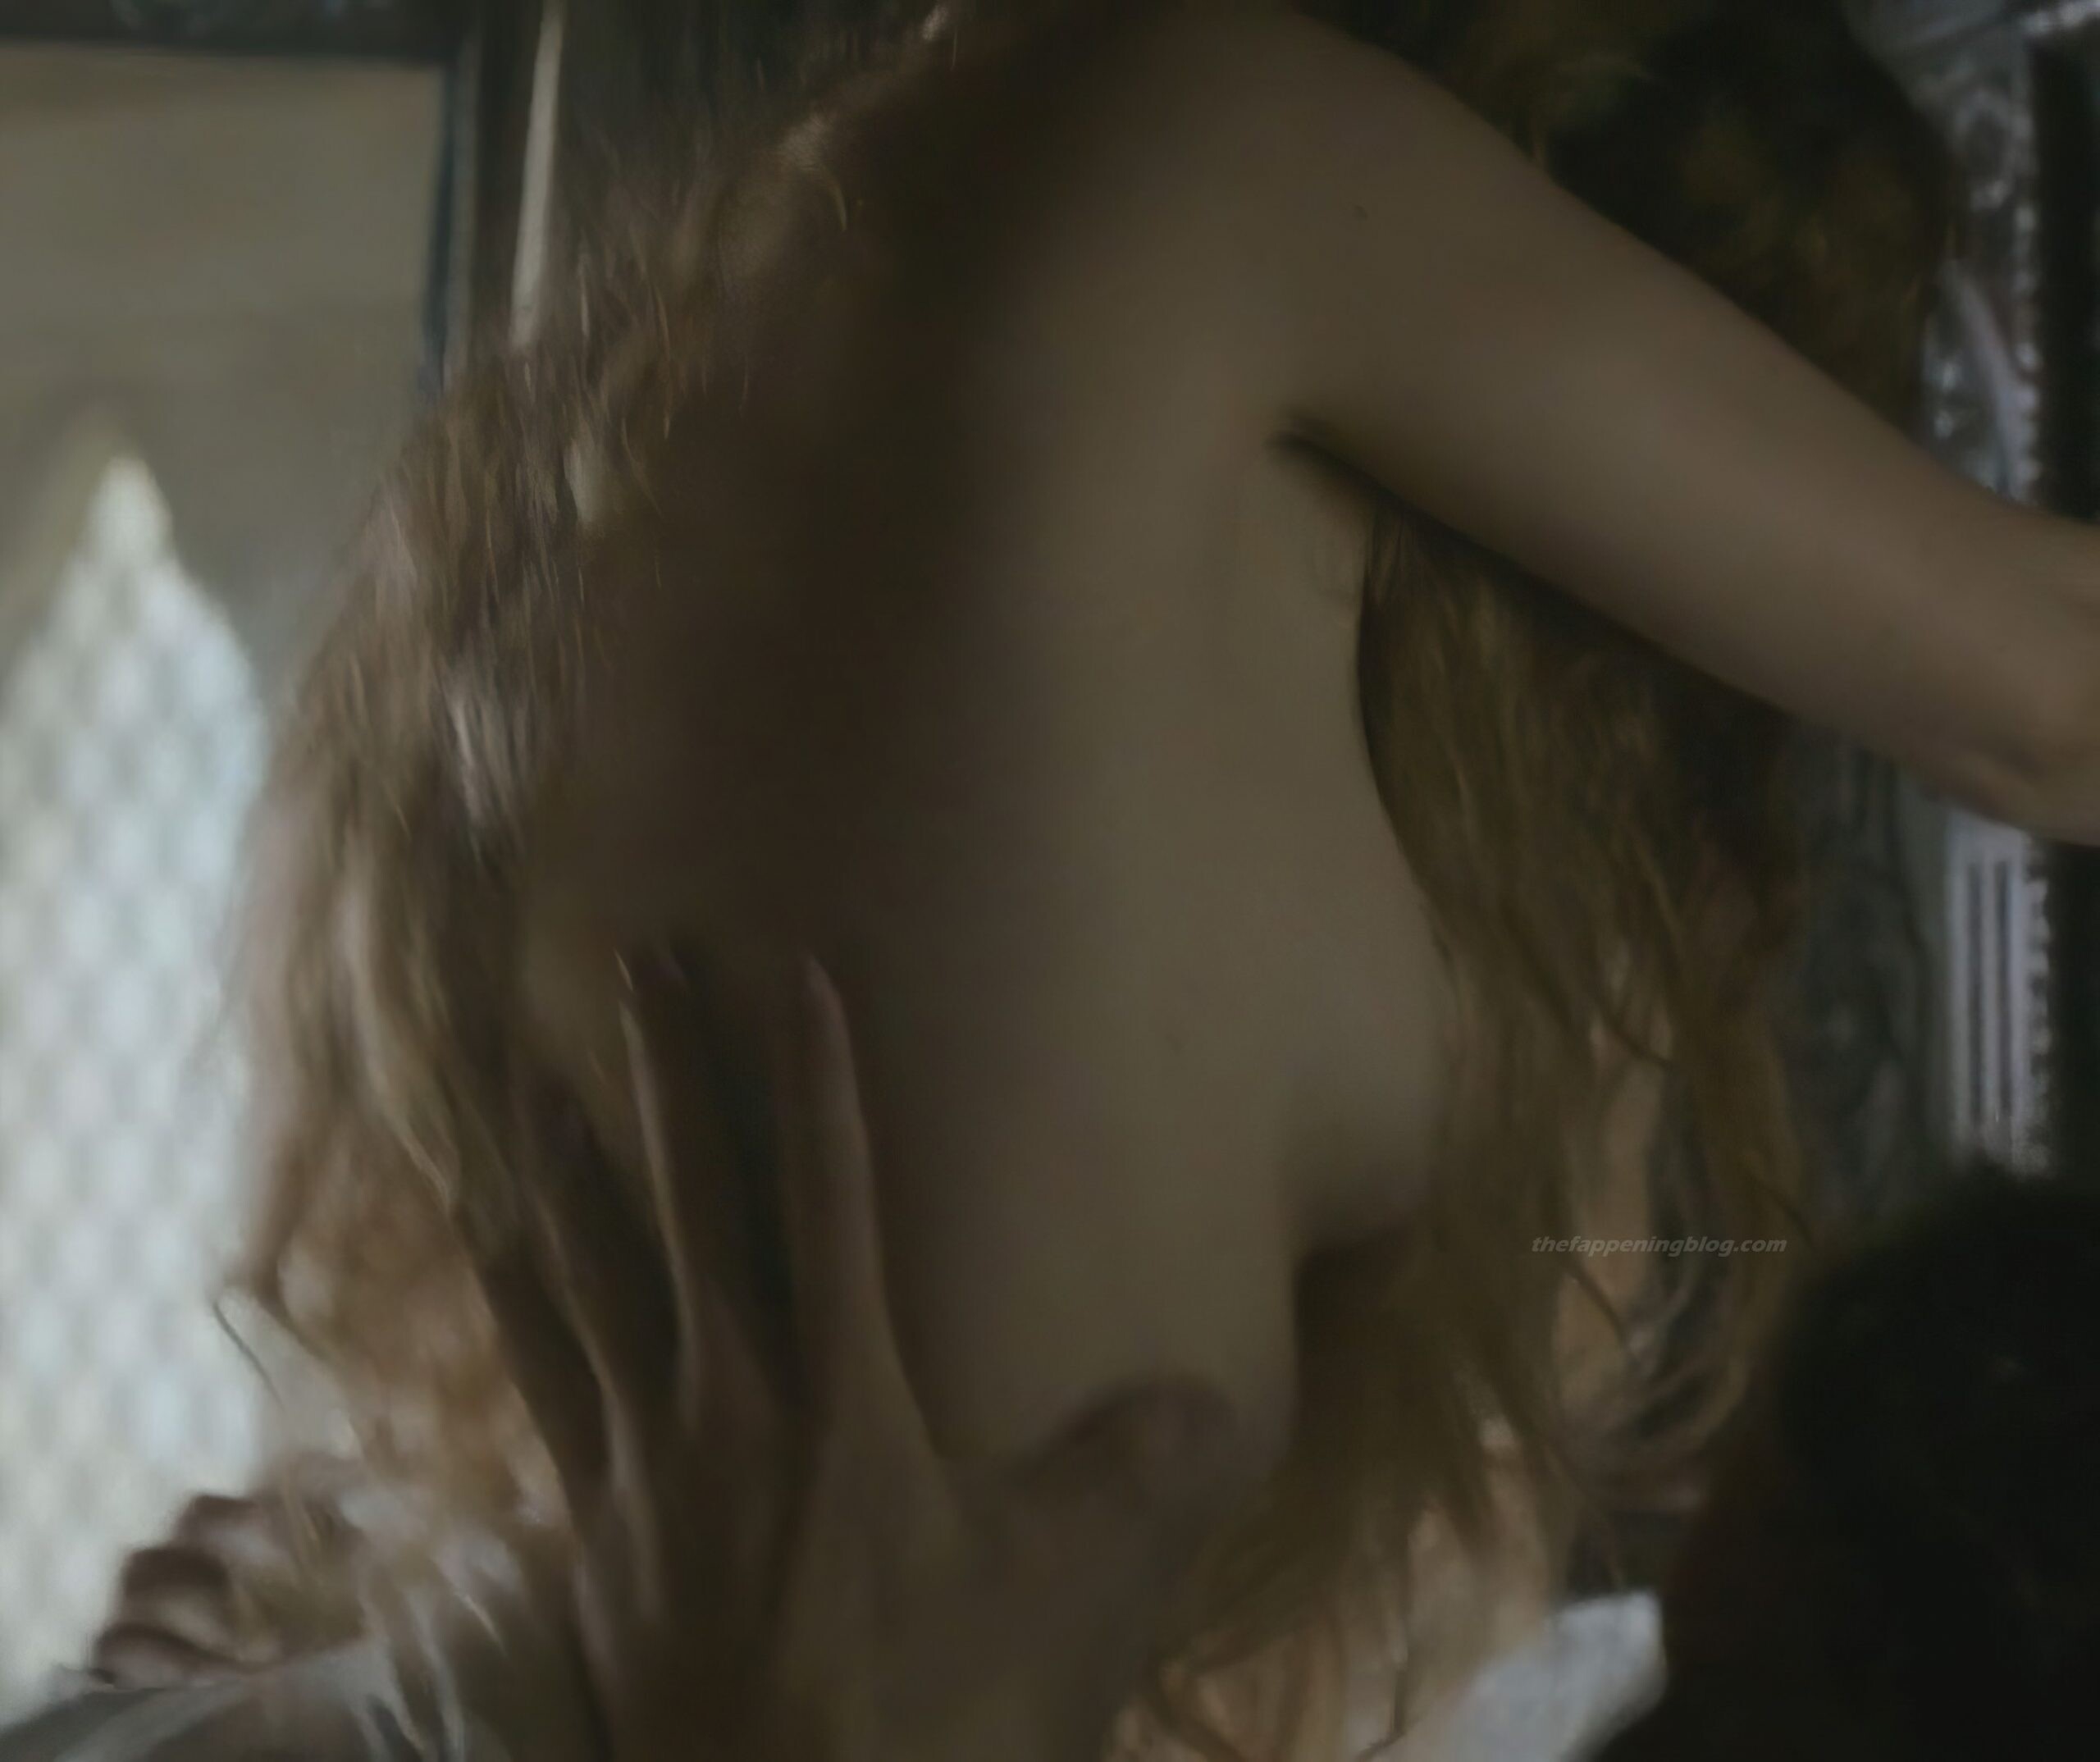 jodie comer naked 74058 fappenings.com1 scaled